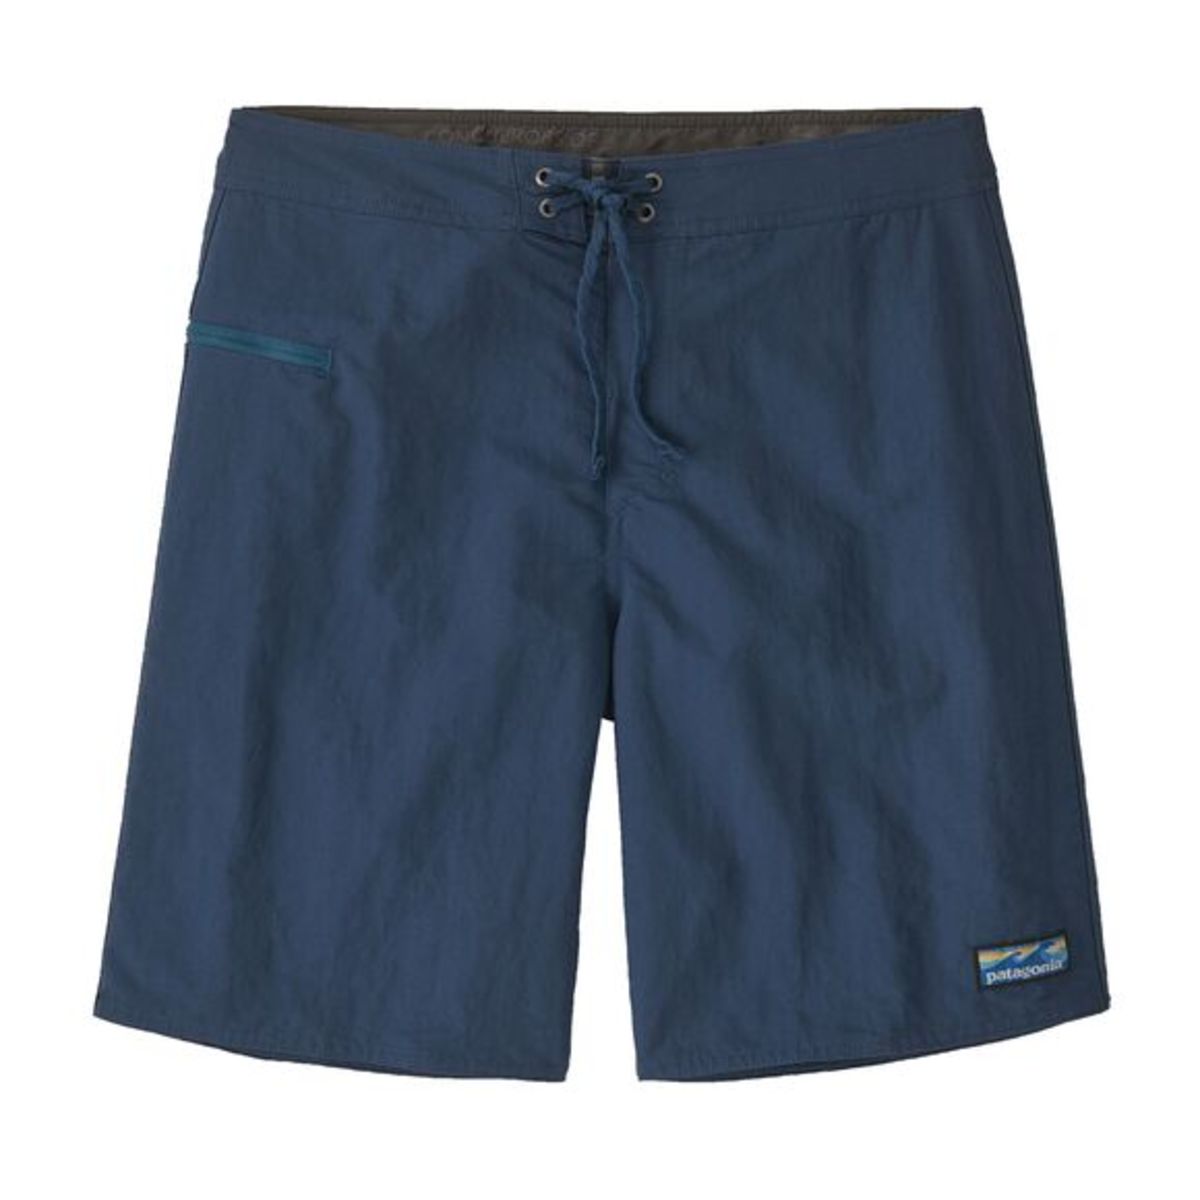 5 Pieces Of Patagonia Gear To Get Psyched For Spring - Surfer Culture